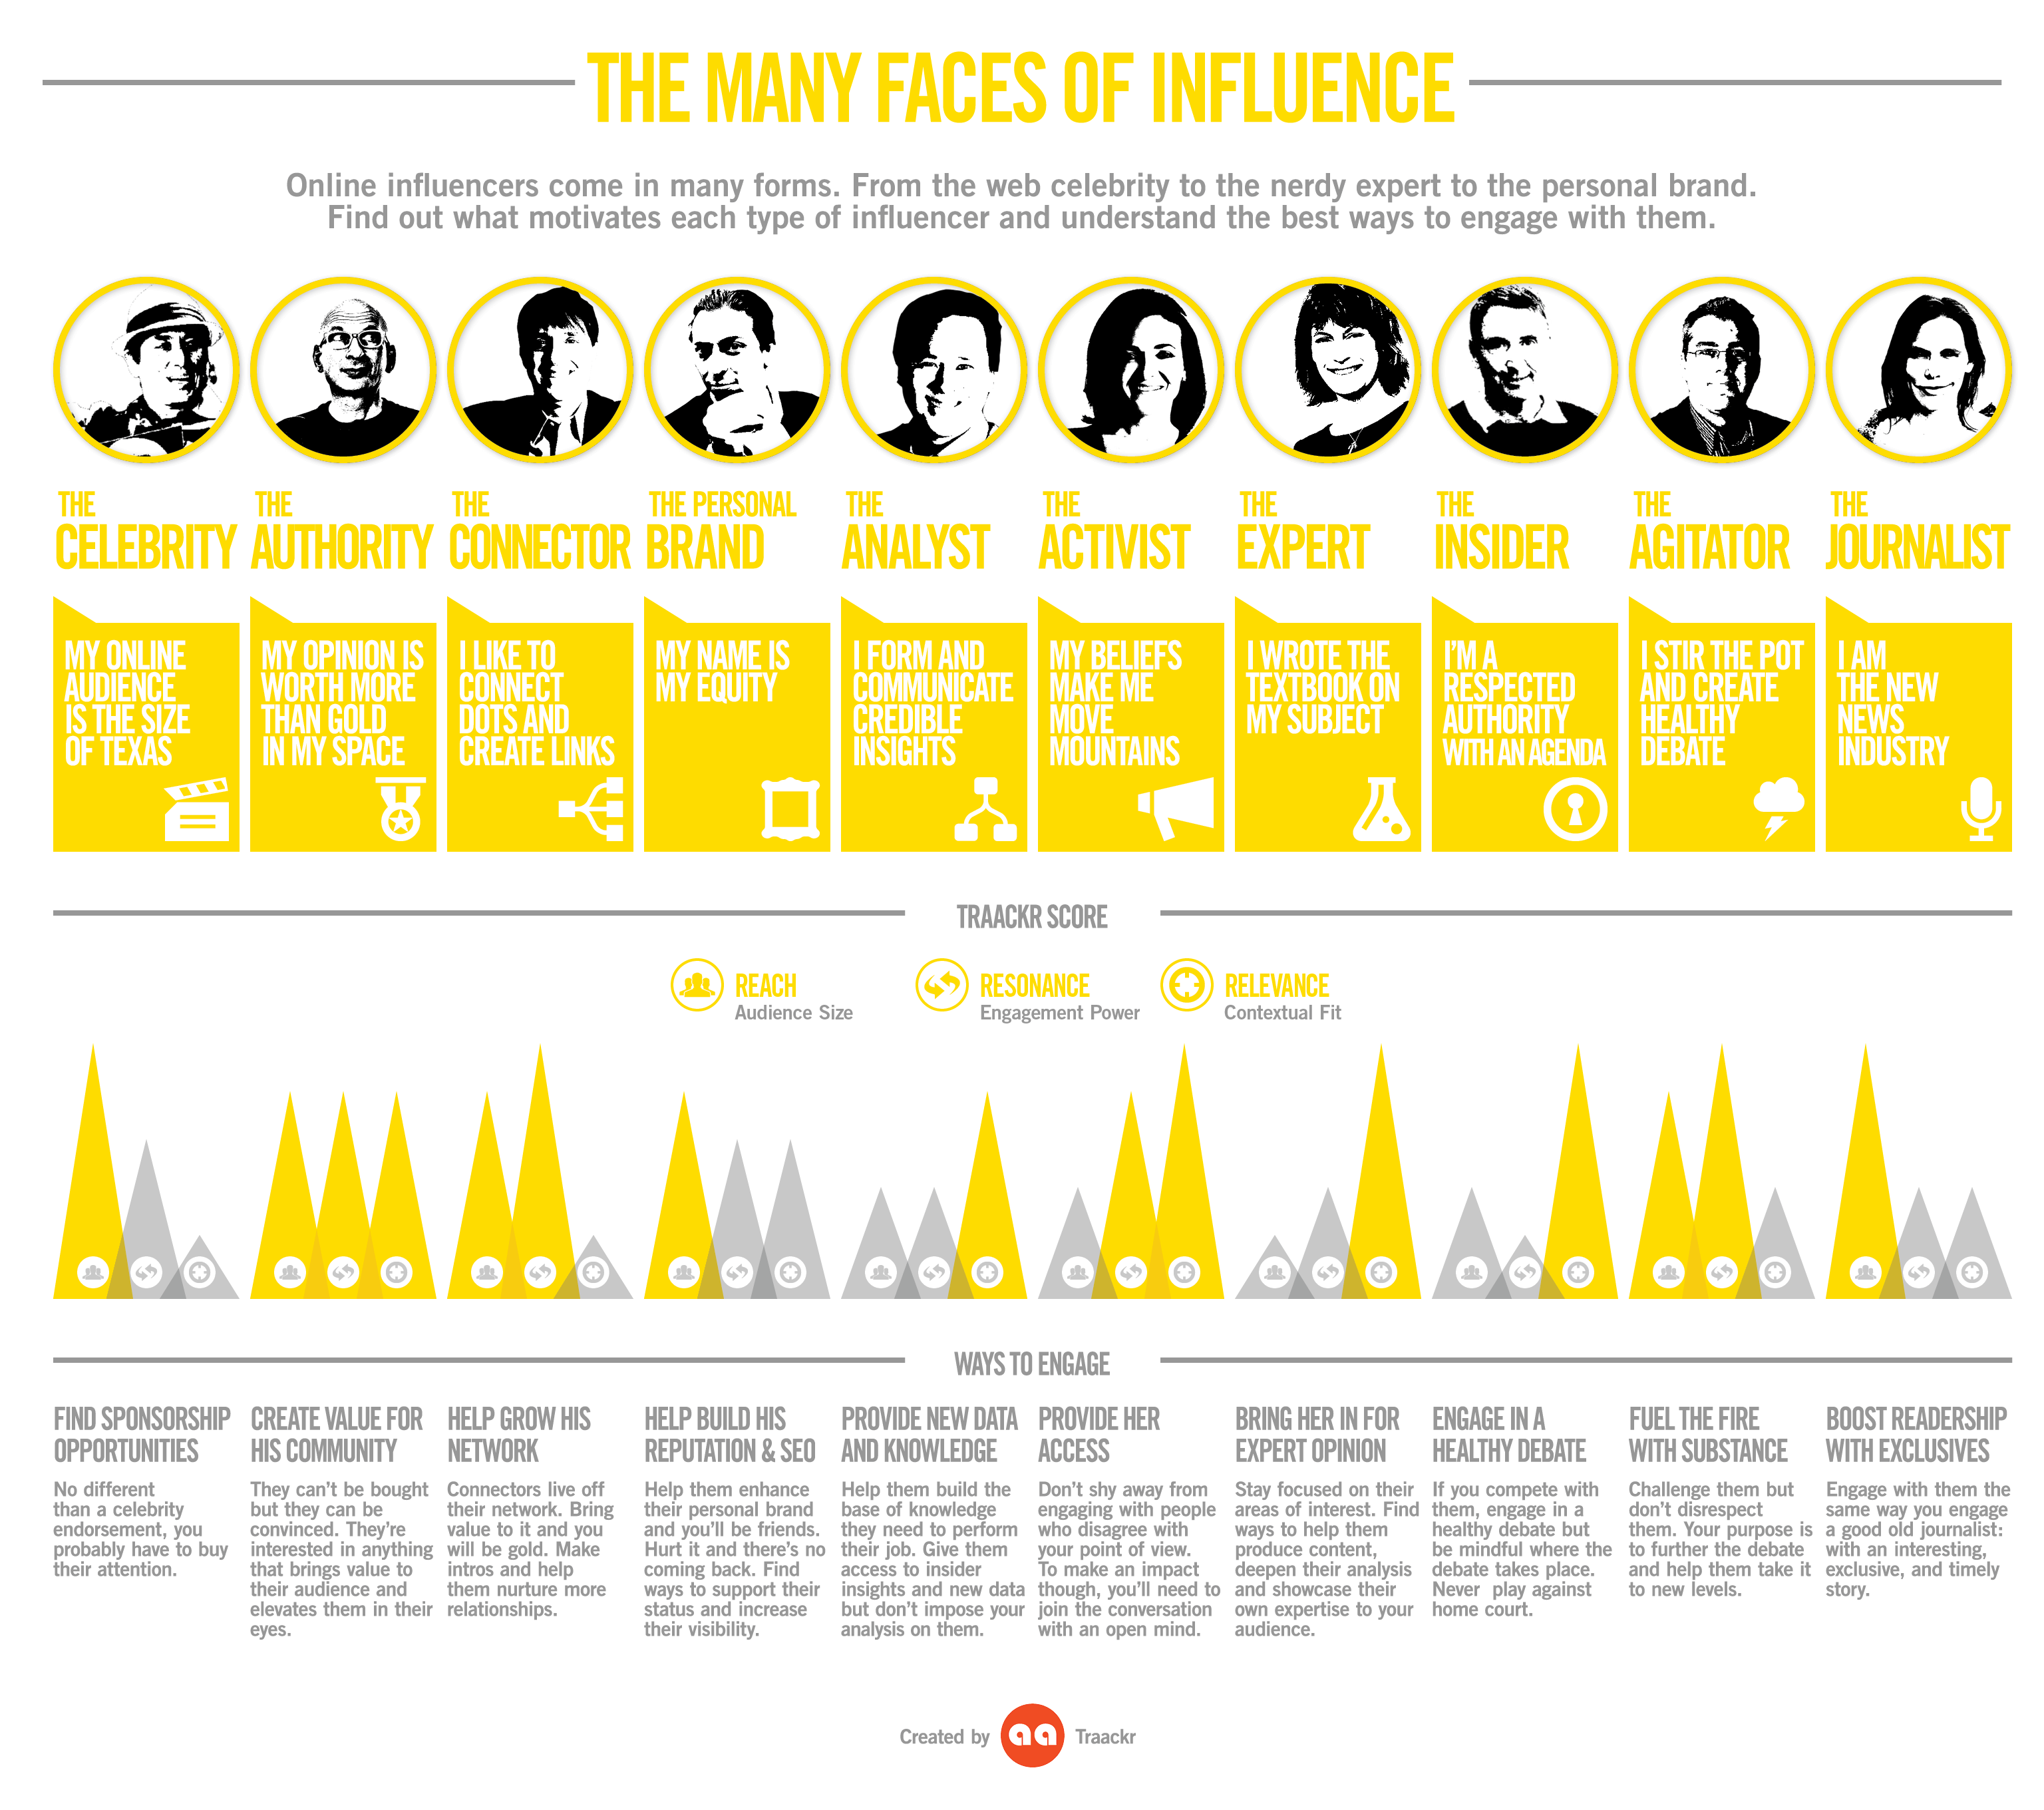 The Many Faces of Influence